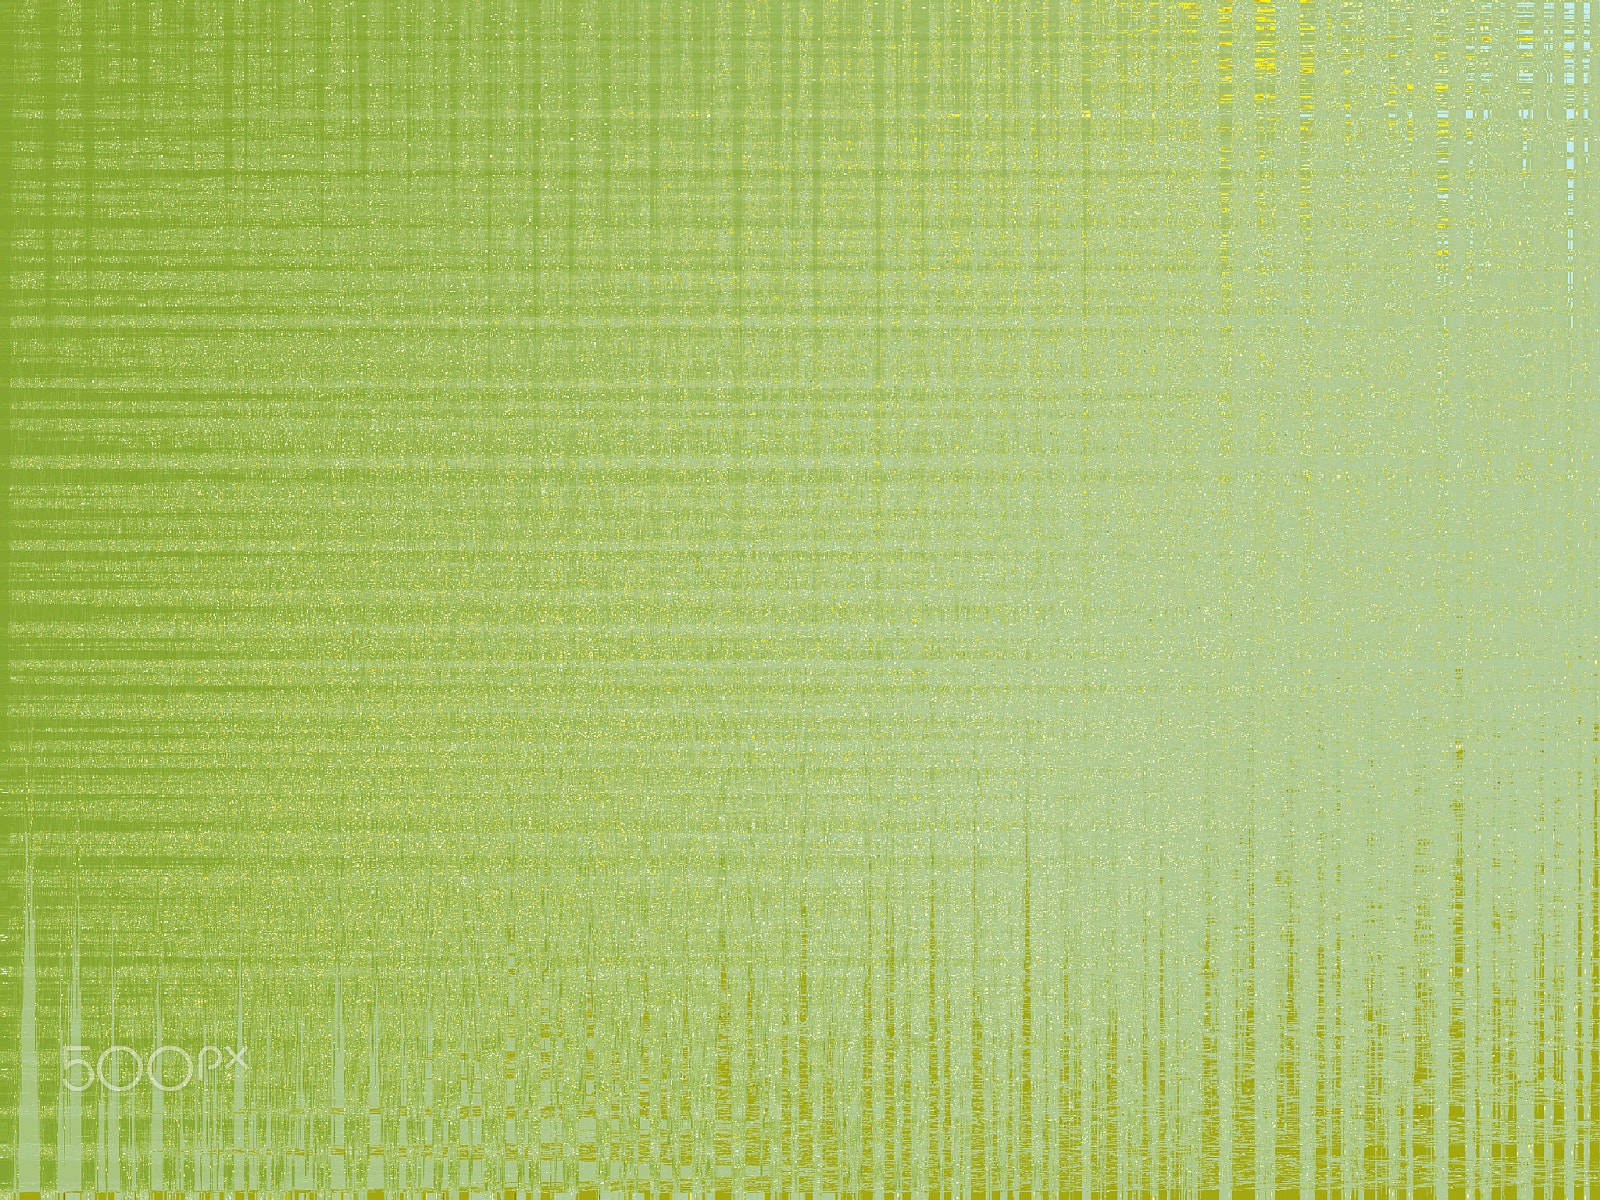 Sony Cyber-shot DSC-W110 sample photo. Abstract textured background in light green tones. photography